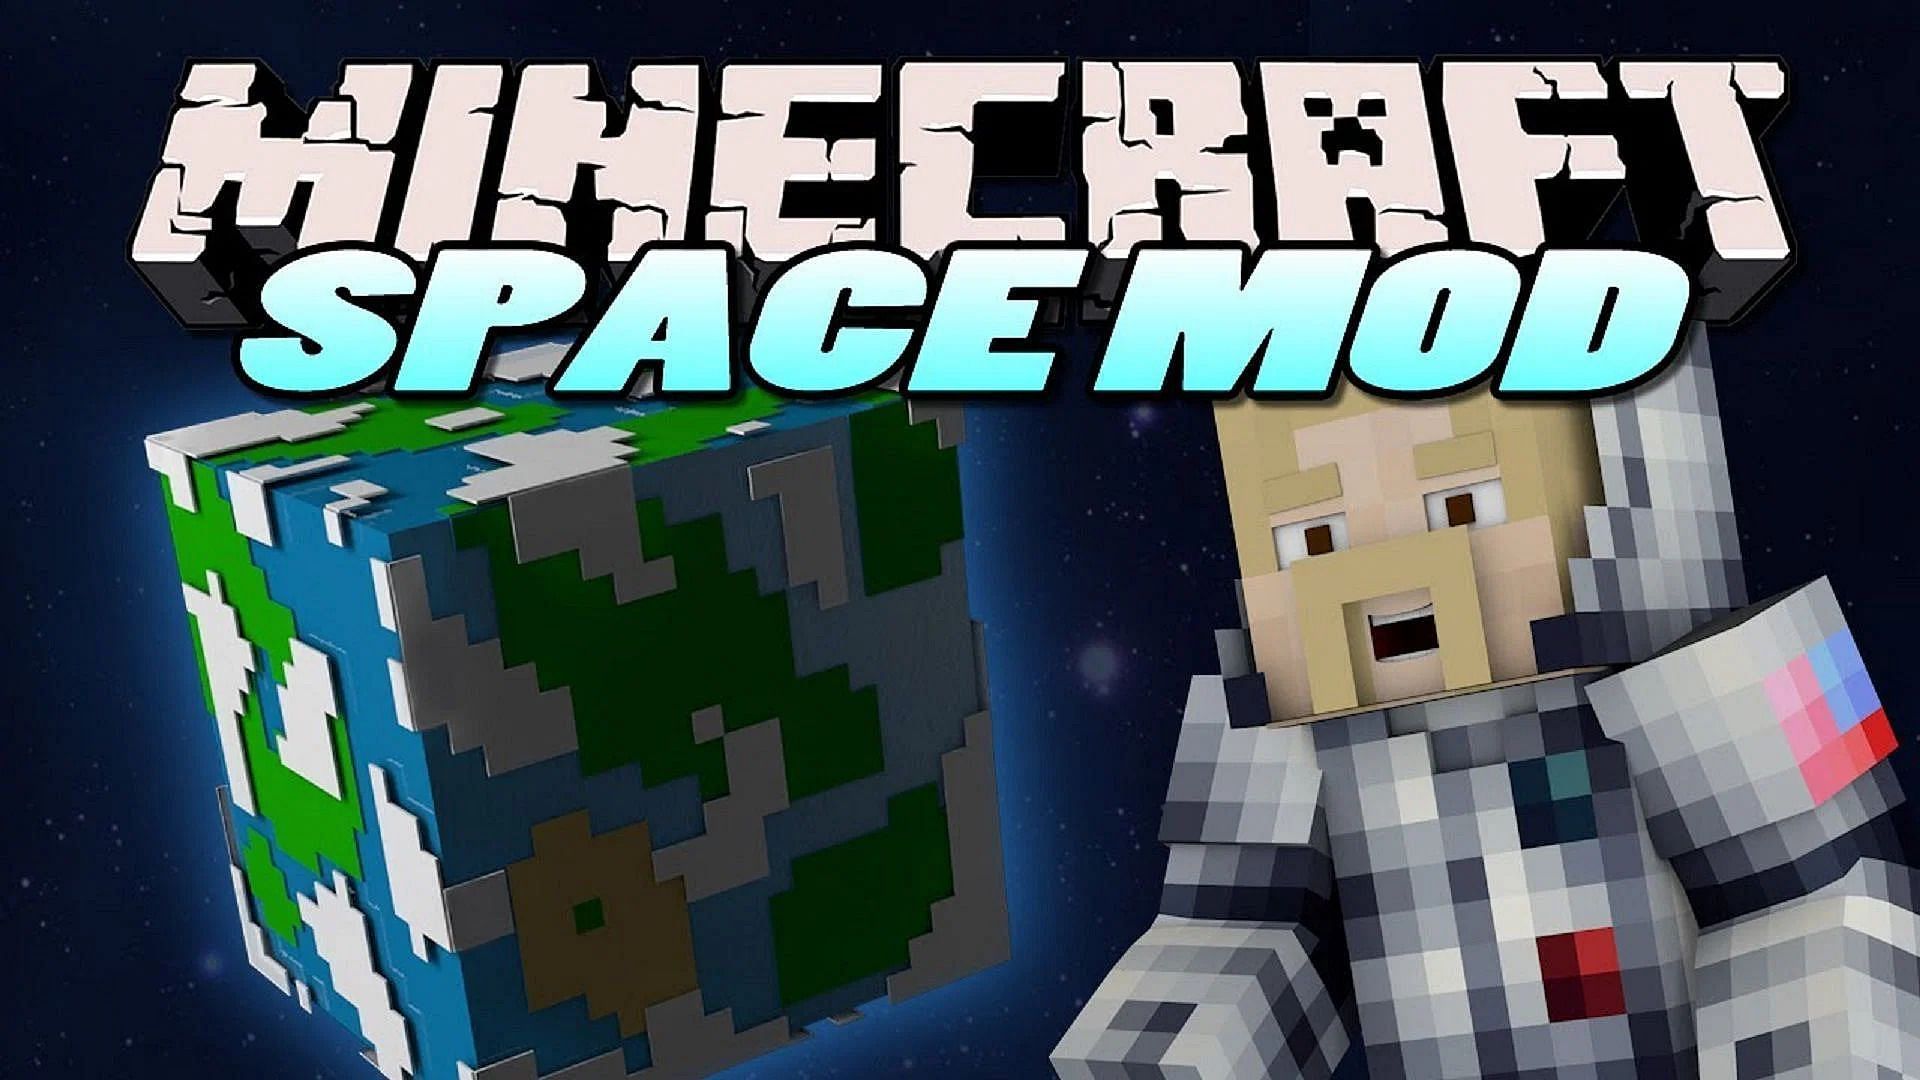 There are various space mods available for Minecraft this year (Image via Wipper/Youtube)